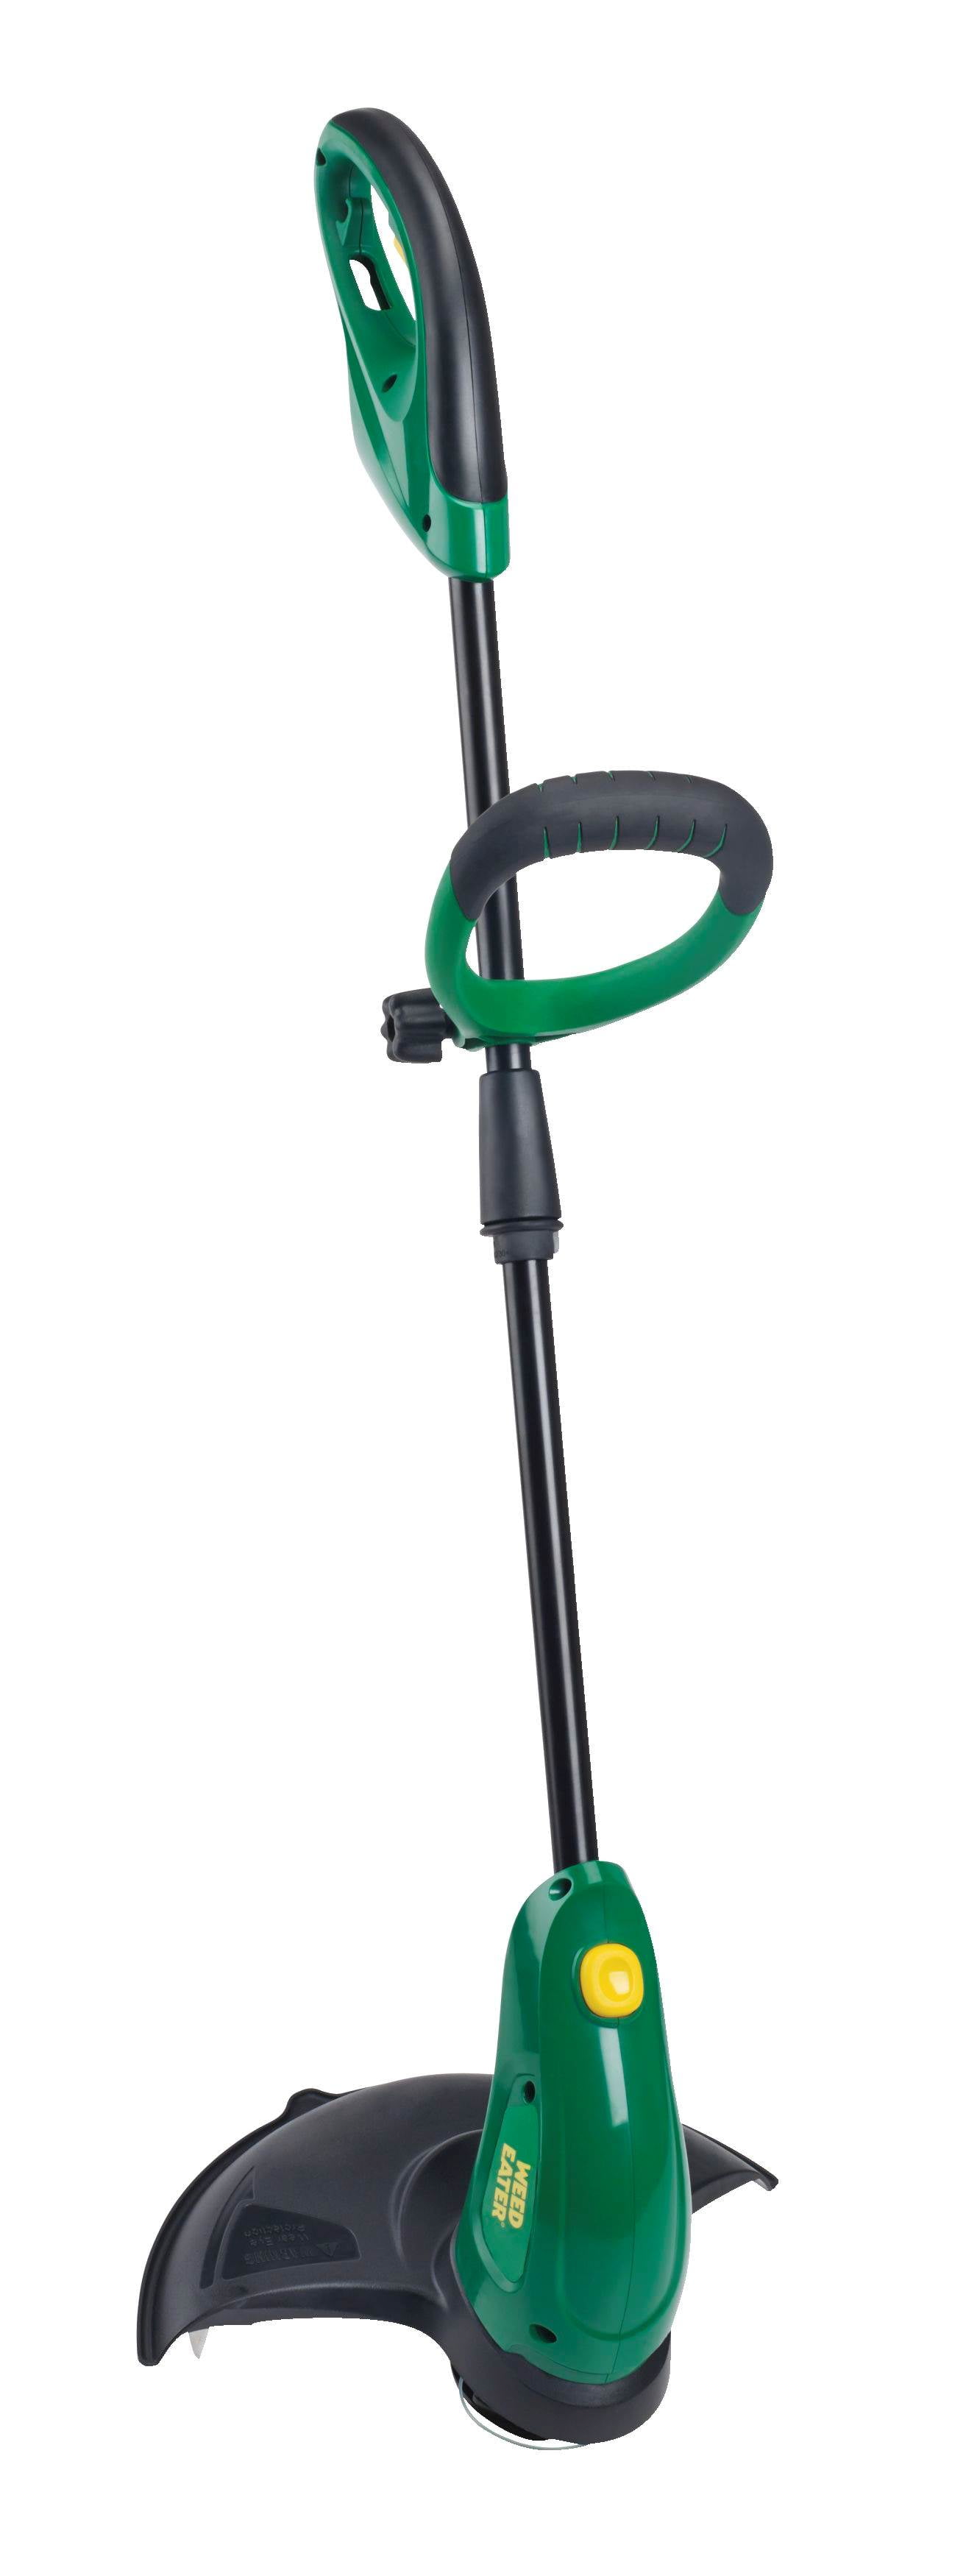 electric weed eater edger